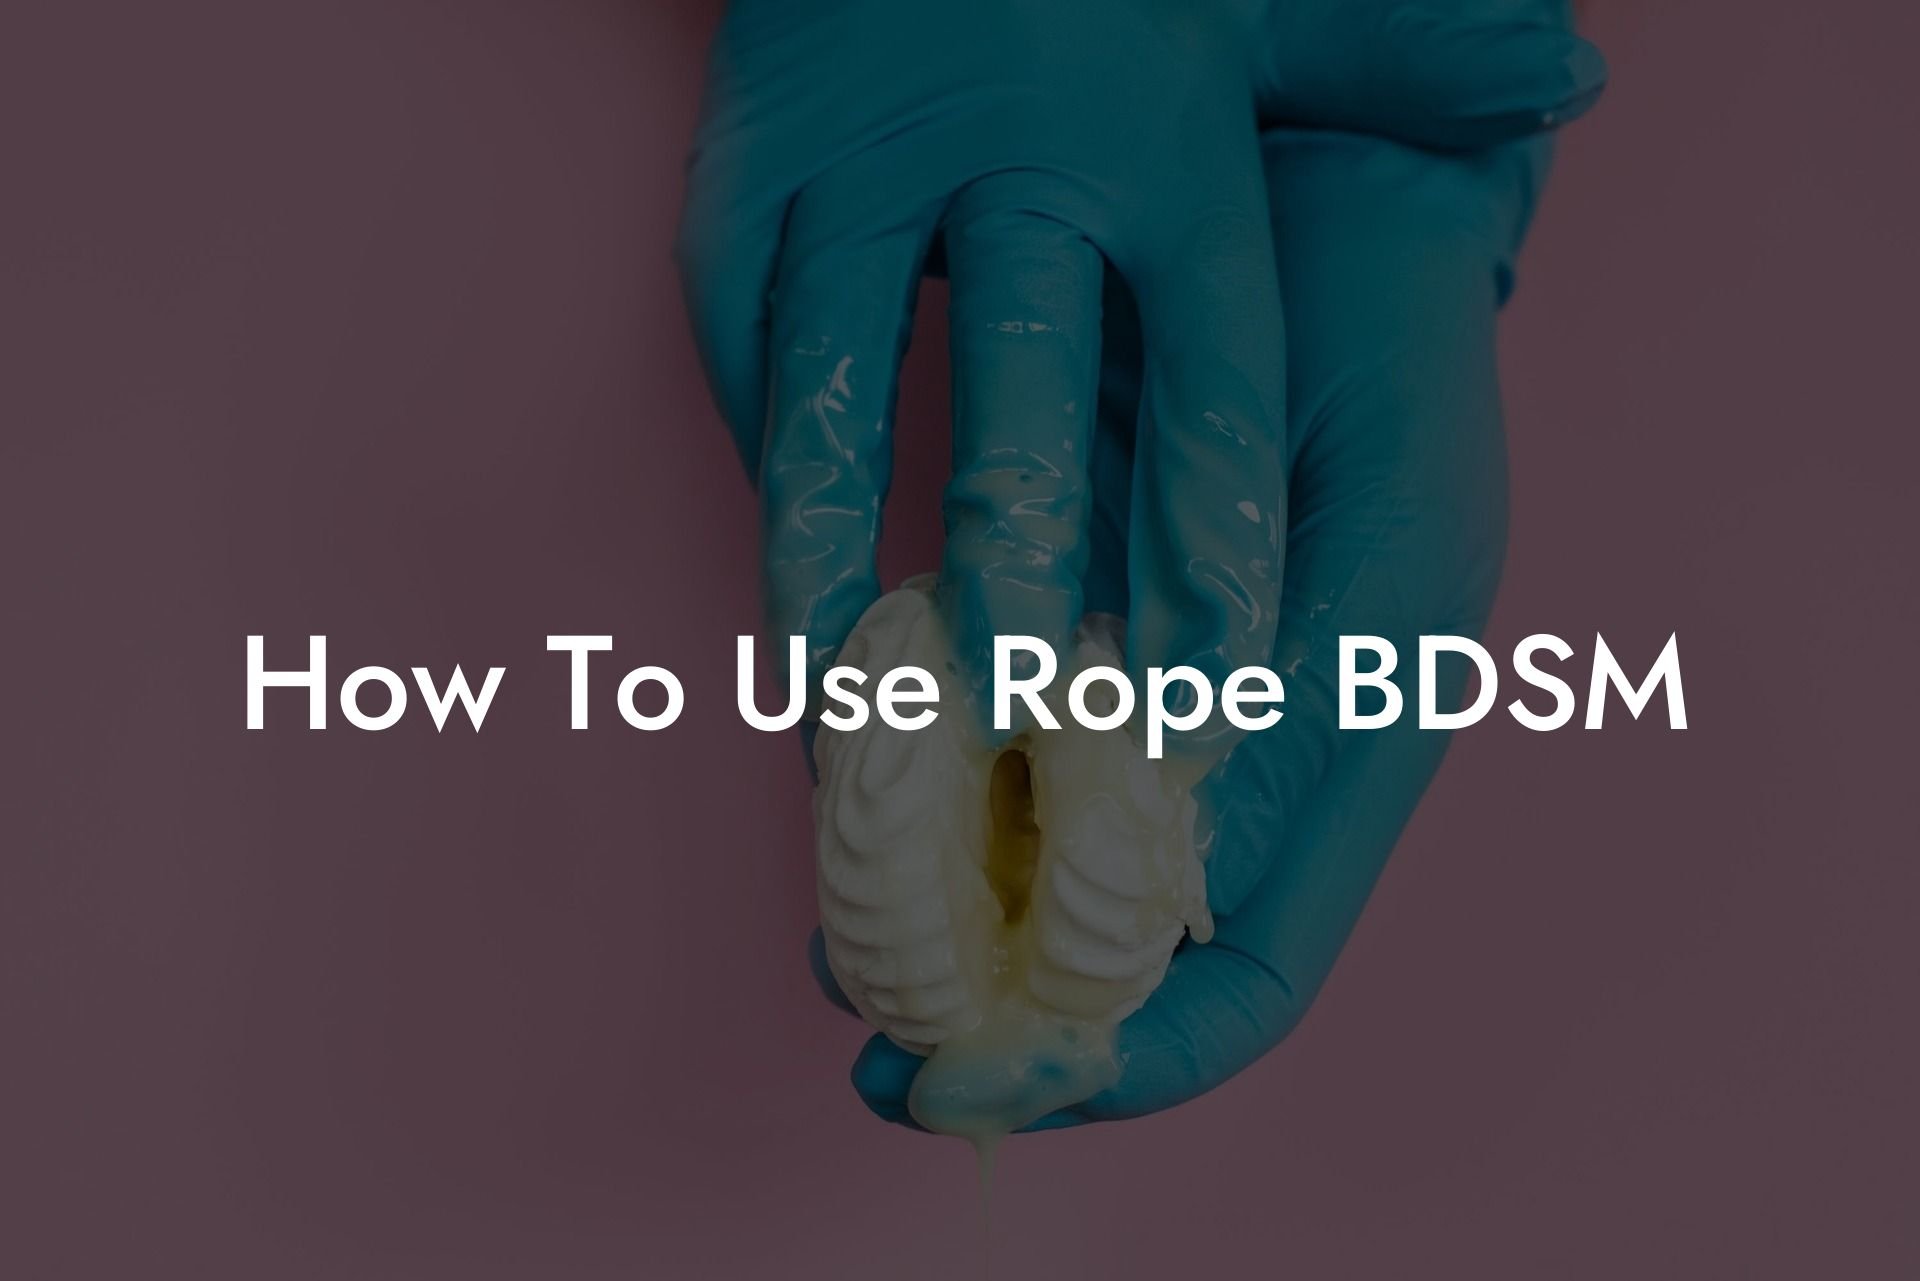 How To Use Rope BDSM